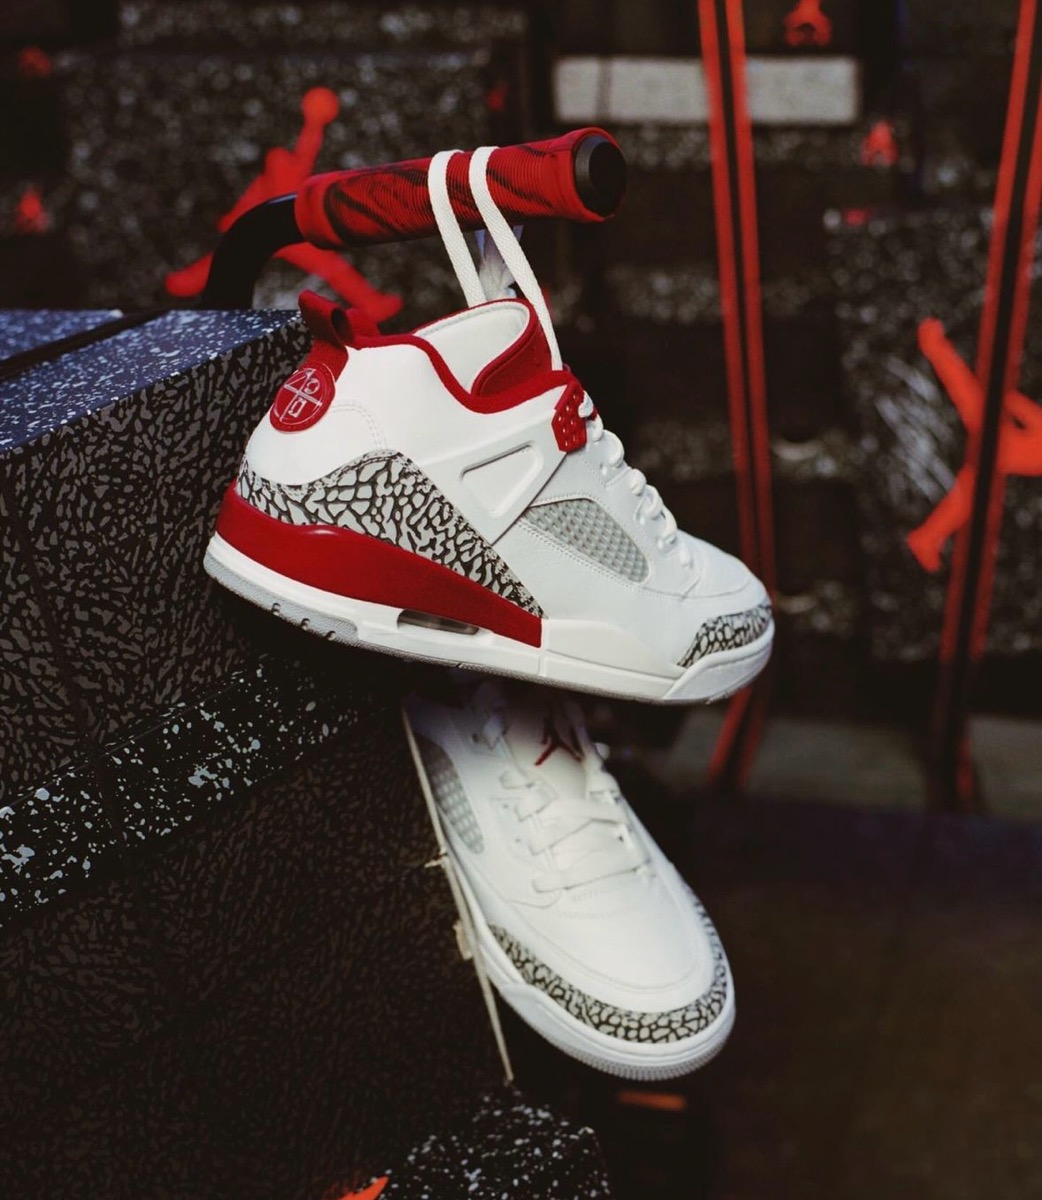 Nike Jordan Spizike Low “Team Red”が国内5月4日より発売［FQ1759-106］ | UP TO DATE